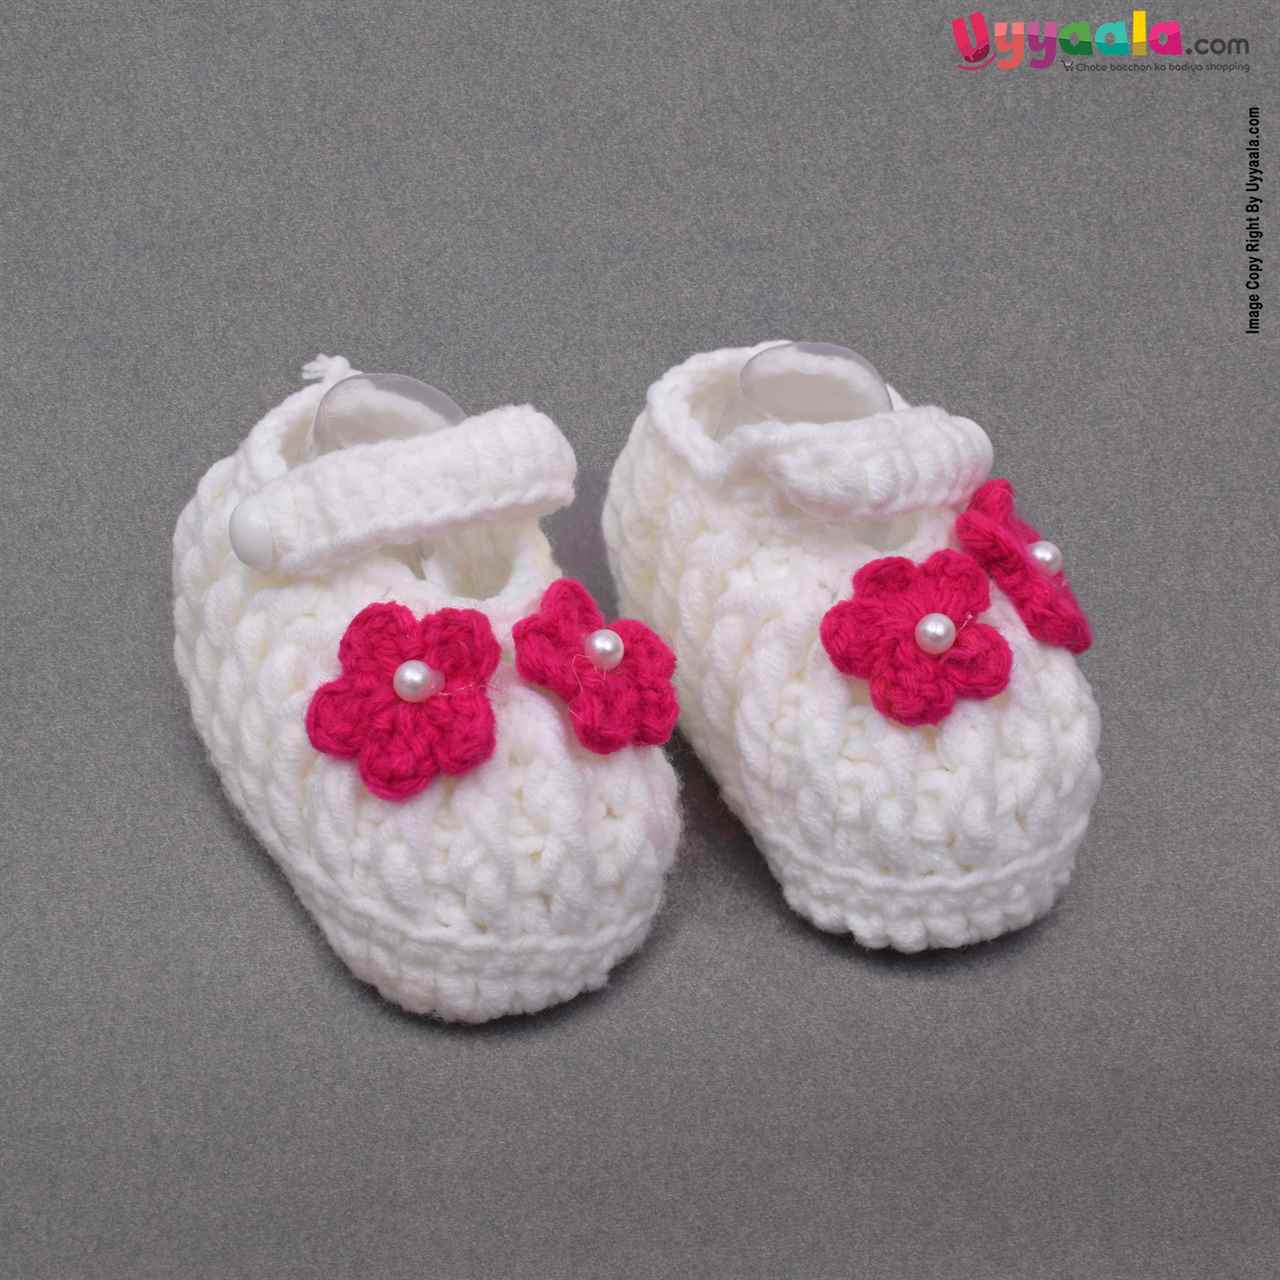 Woolen Hand Knitted Socks With Flower Patches For Newborn Babies - Pink & White 0-3m